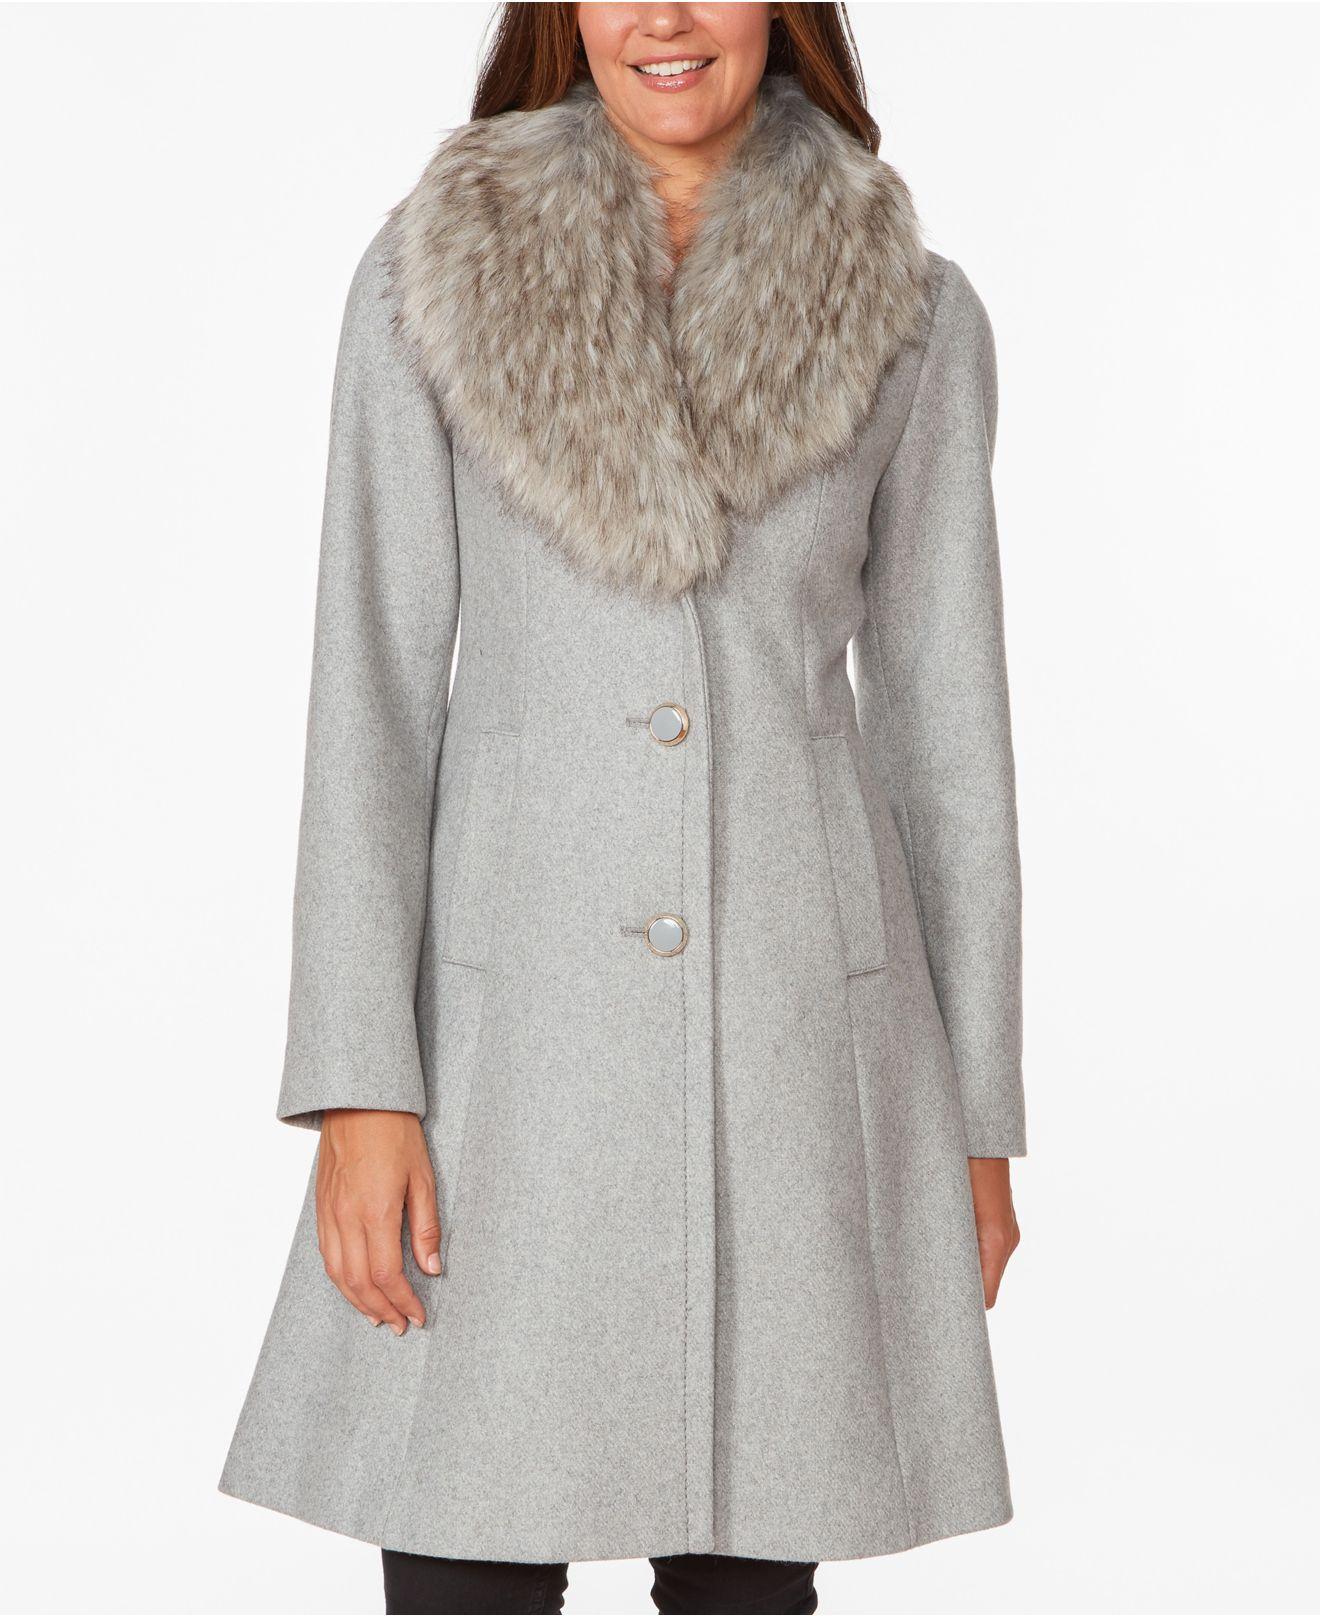 Kate Spade Faux-fur Collar Skirted Coat in Heather Grey (Gray) - Lyst